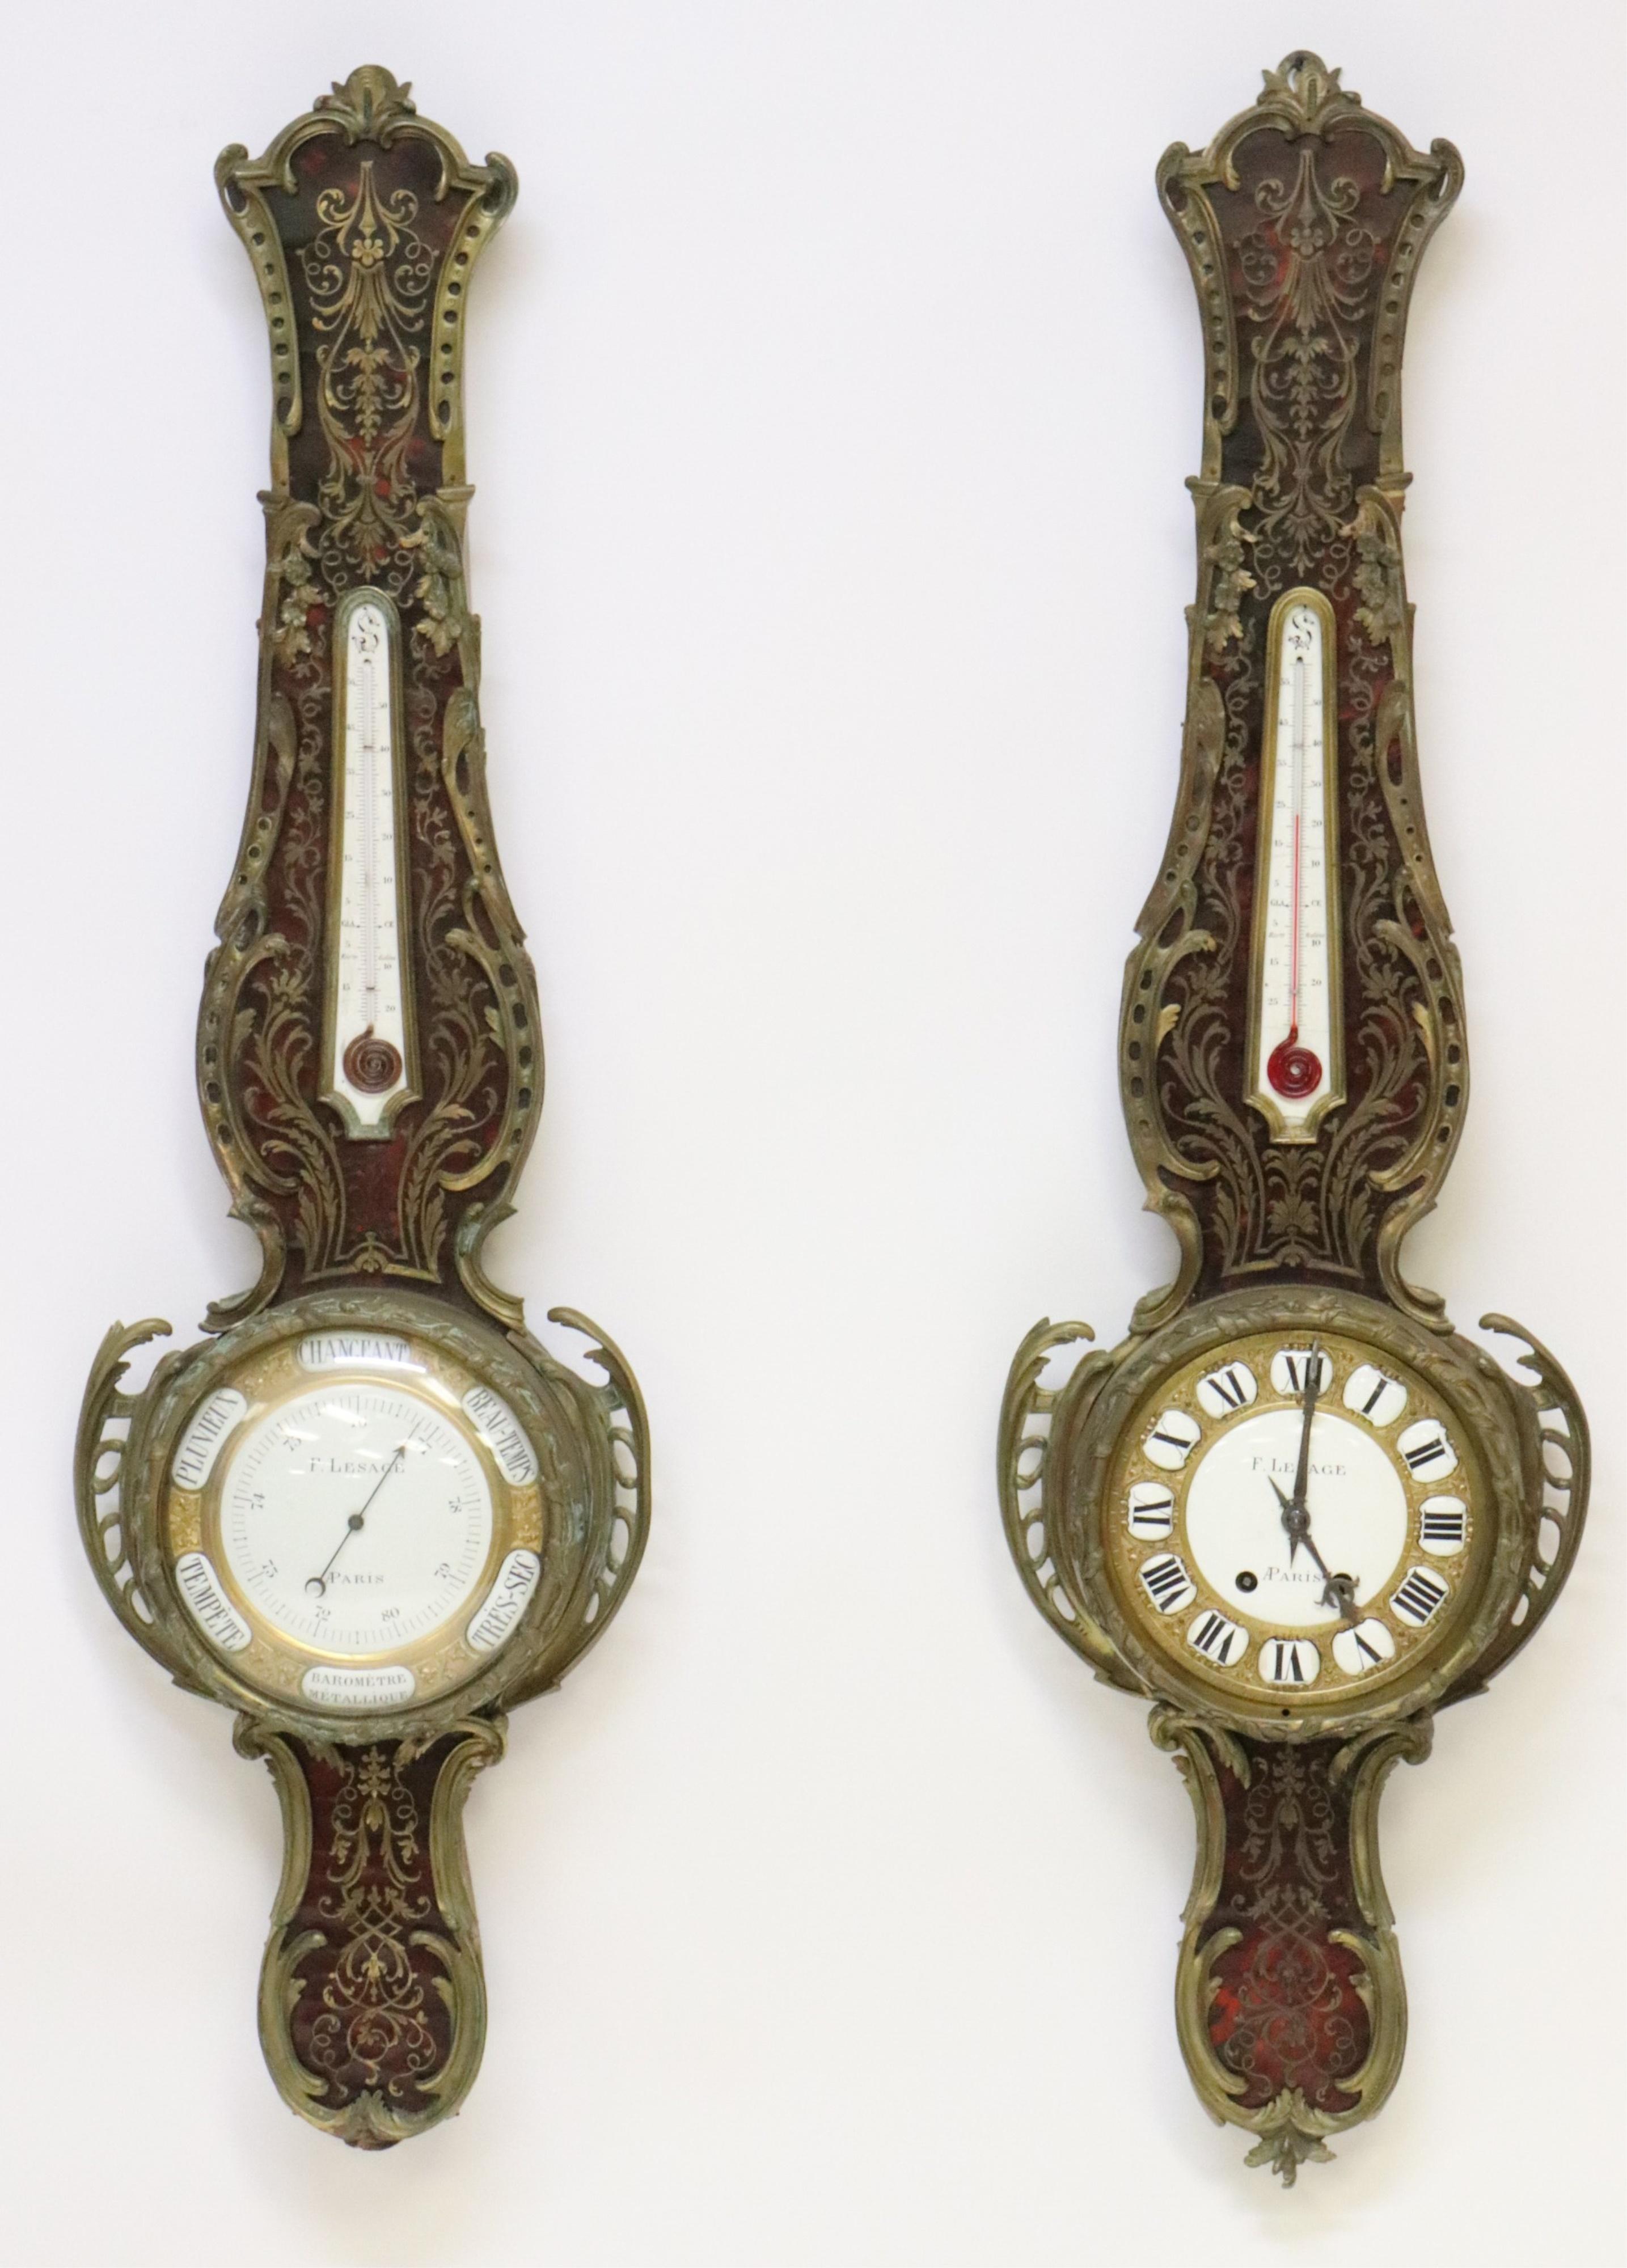 Boulle Marquetry Wall Clock And Barometer By F. Lesage, Paris, Mid-Late 19th C. Sold For $3,250